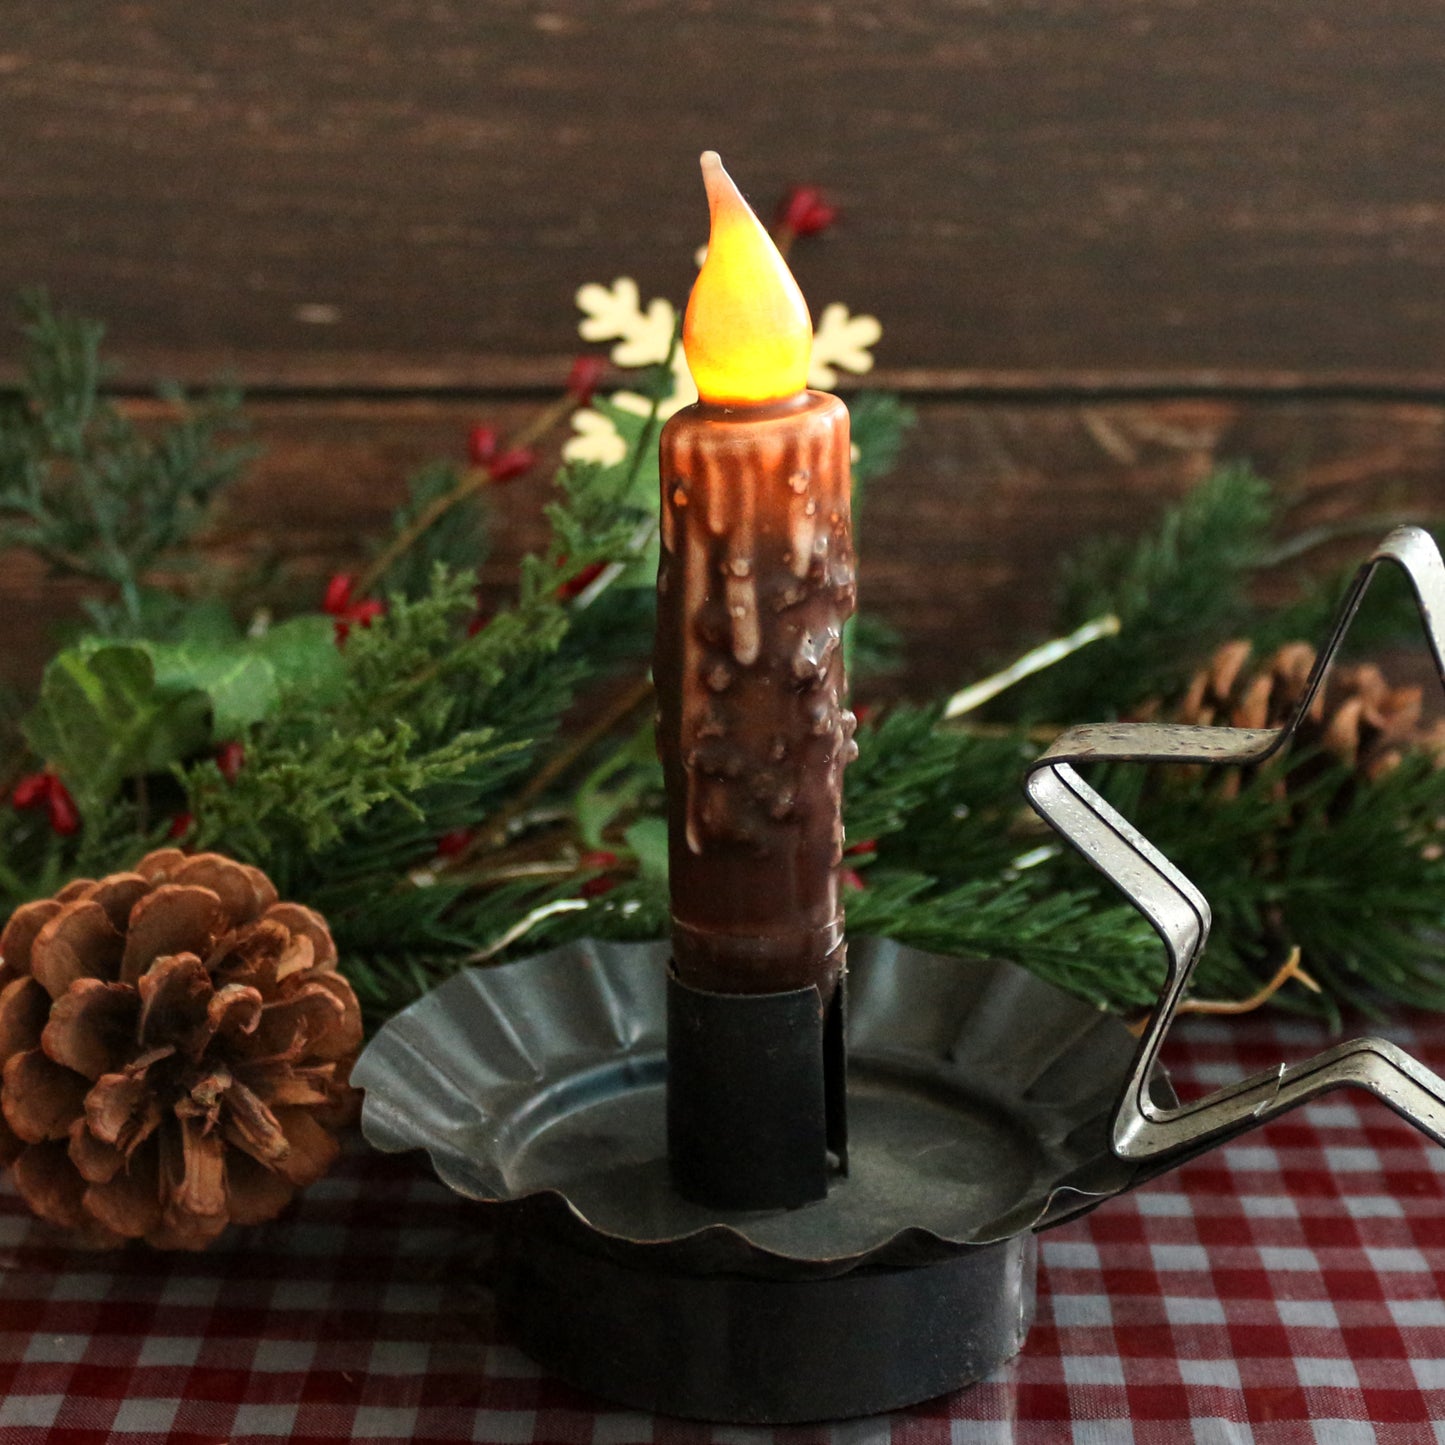 CVHOMEDECO. Real Wax Hand Dipped Battery Operated LED Timer Taper Candles Rustic Primitive Flameless Lights Décor, 4.75 Inch, Brwon, 6 PCS in a Package